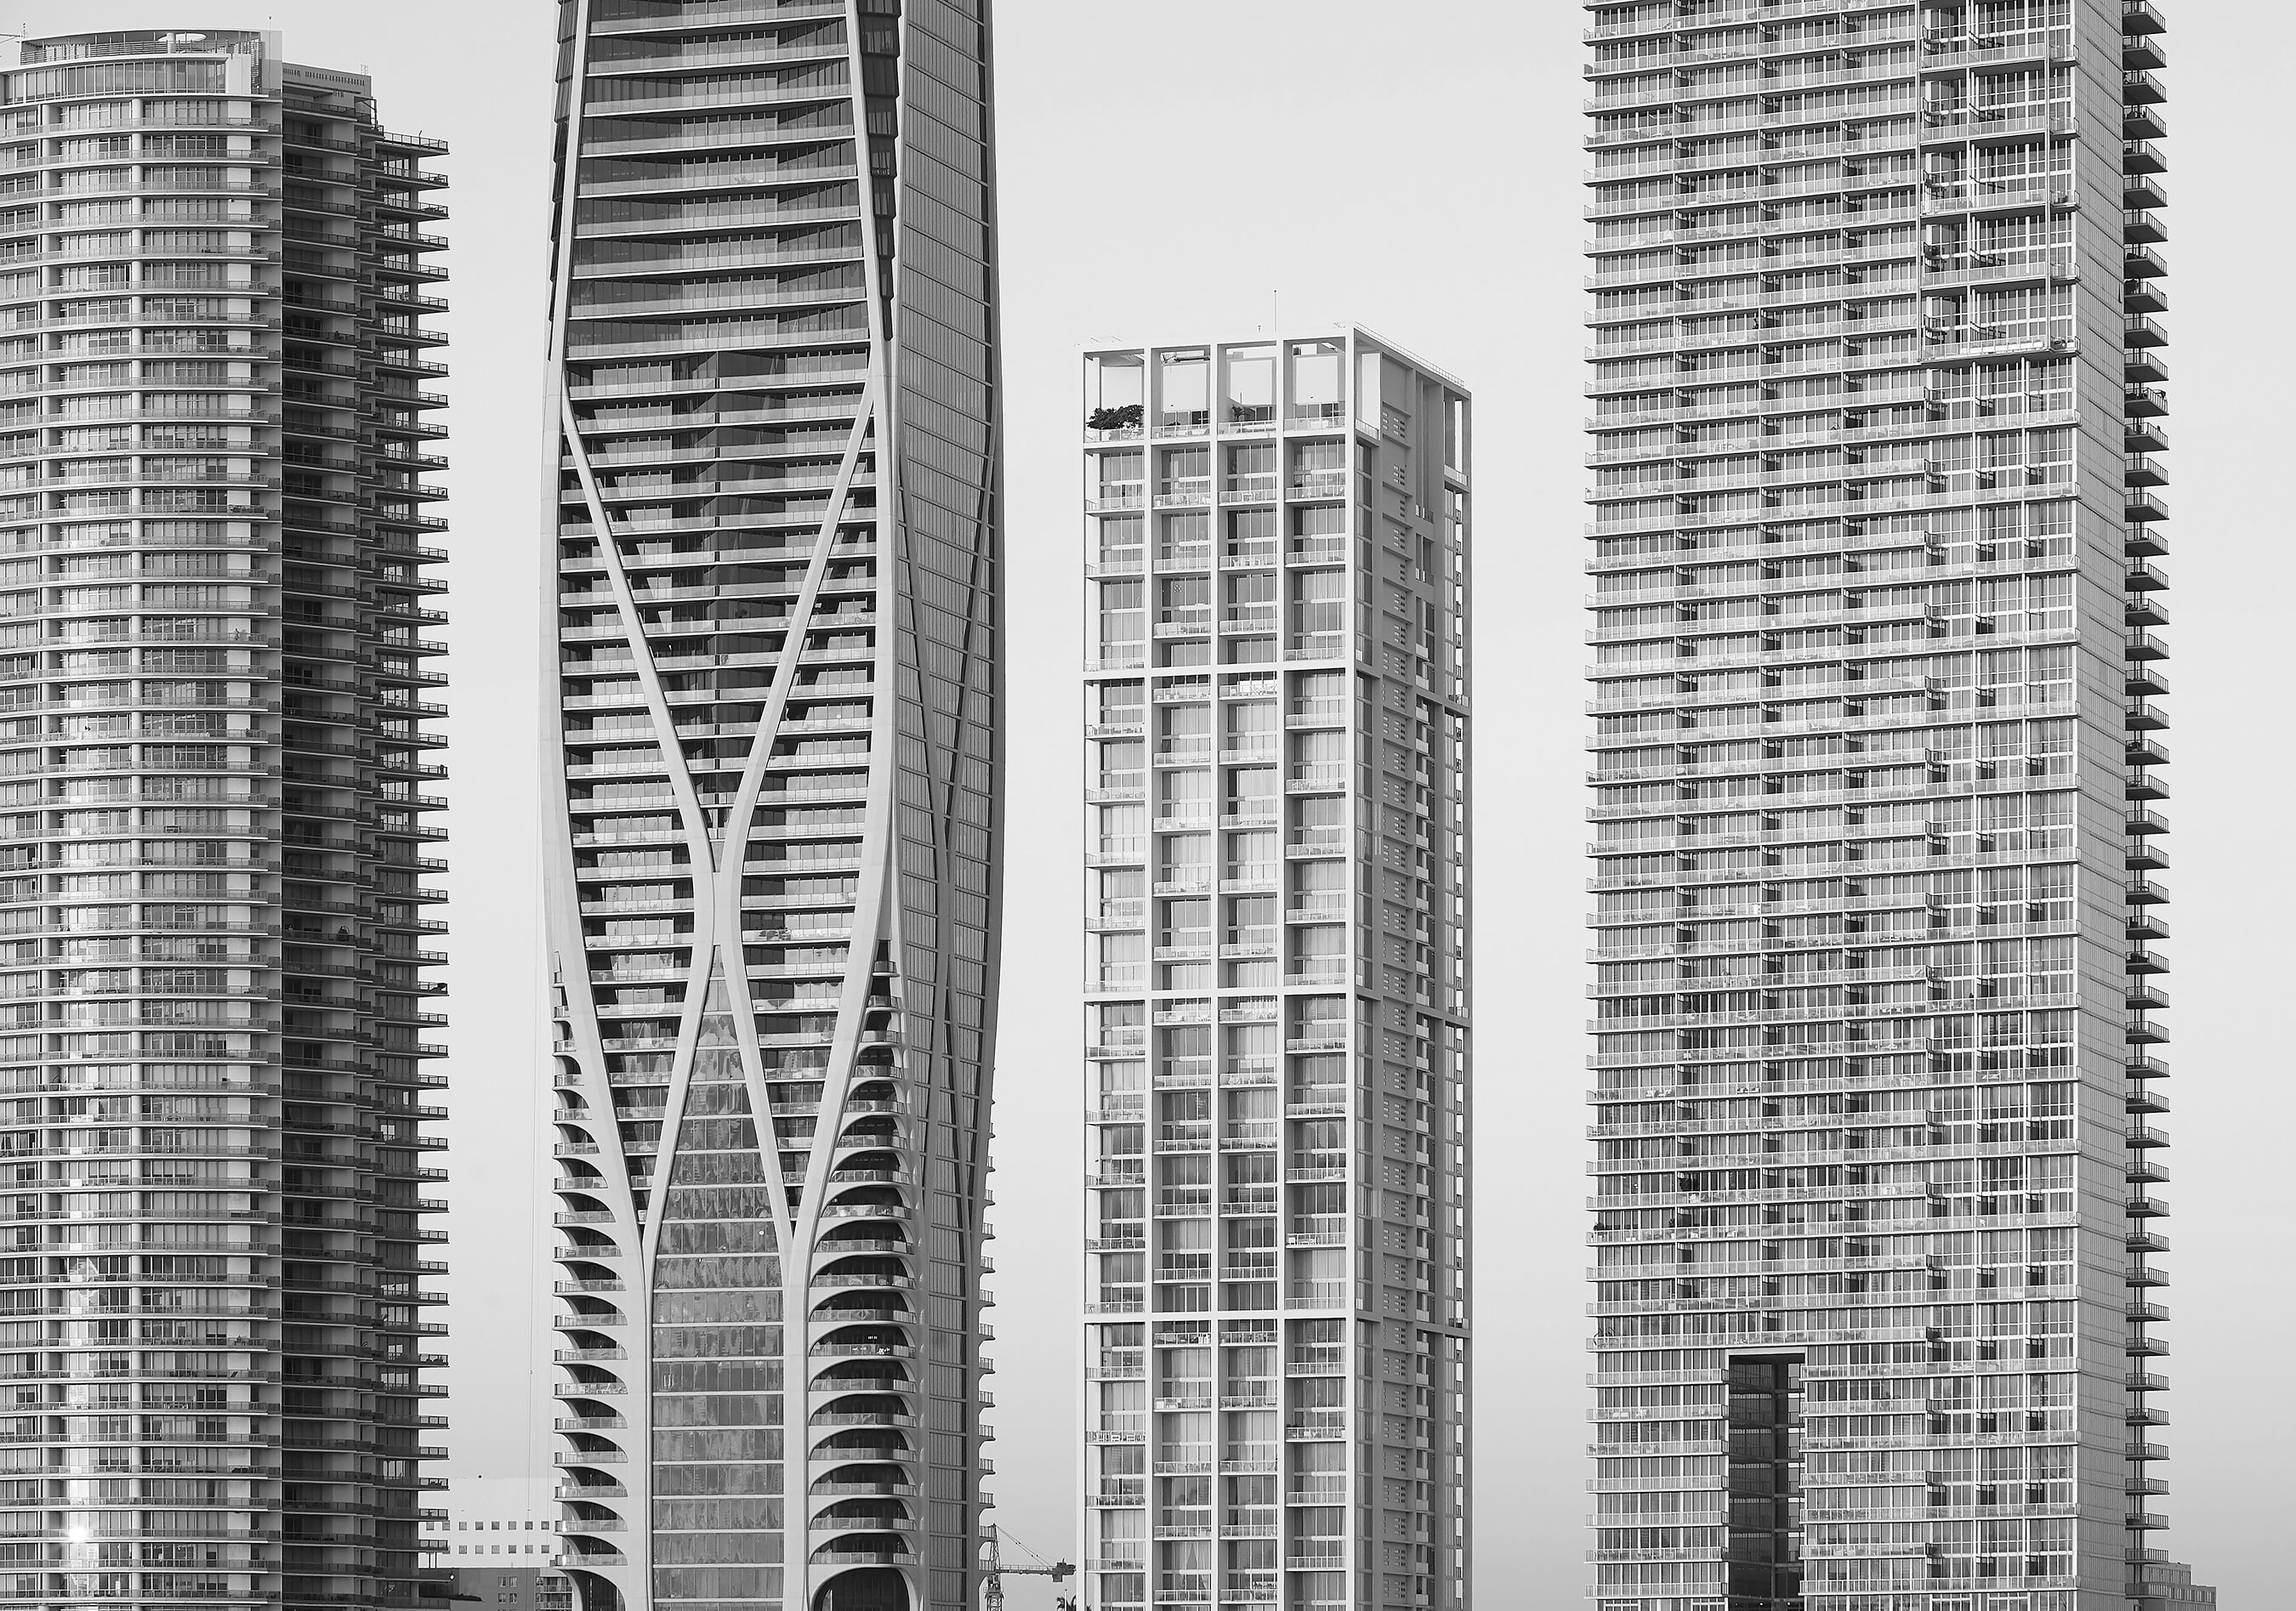 Black and white photo of thin Miami towers next to each other against the sky